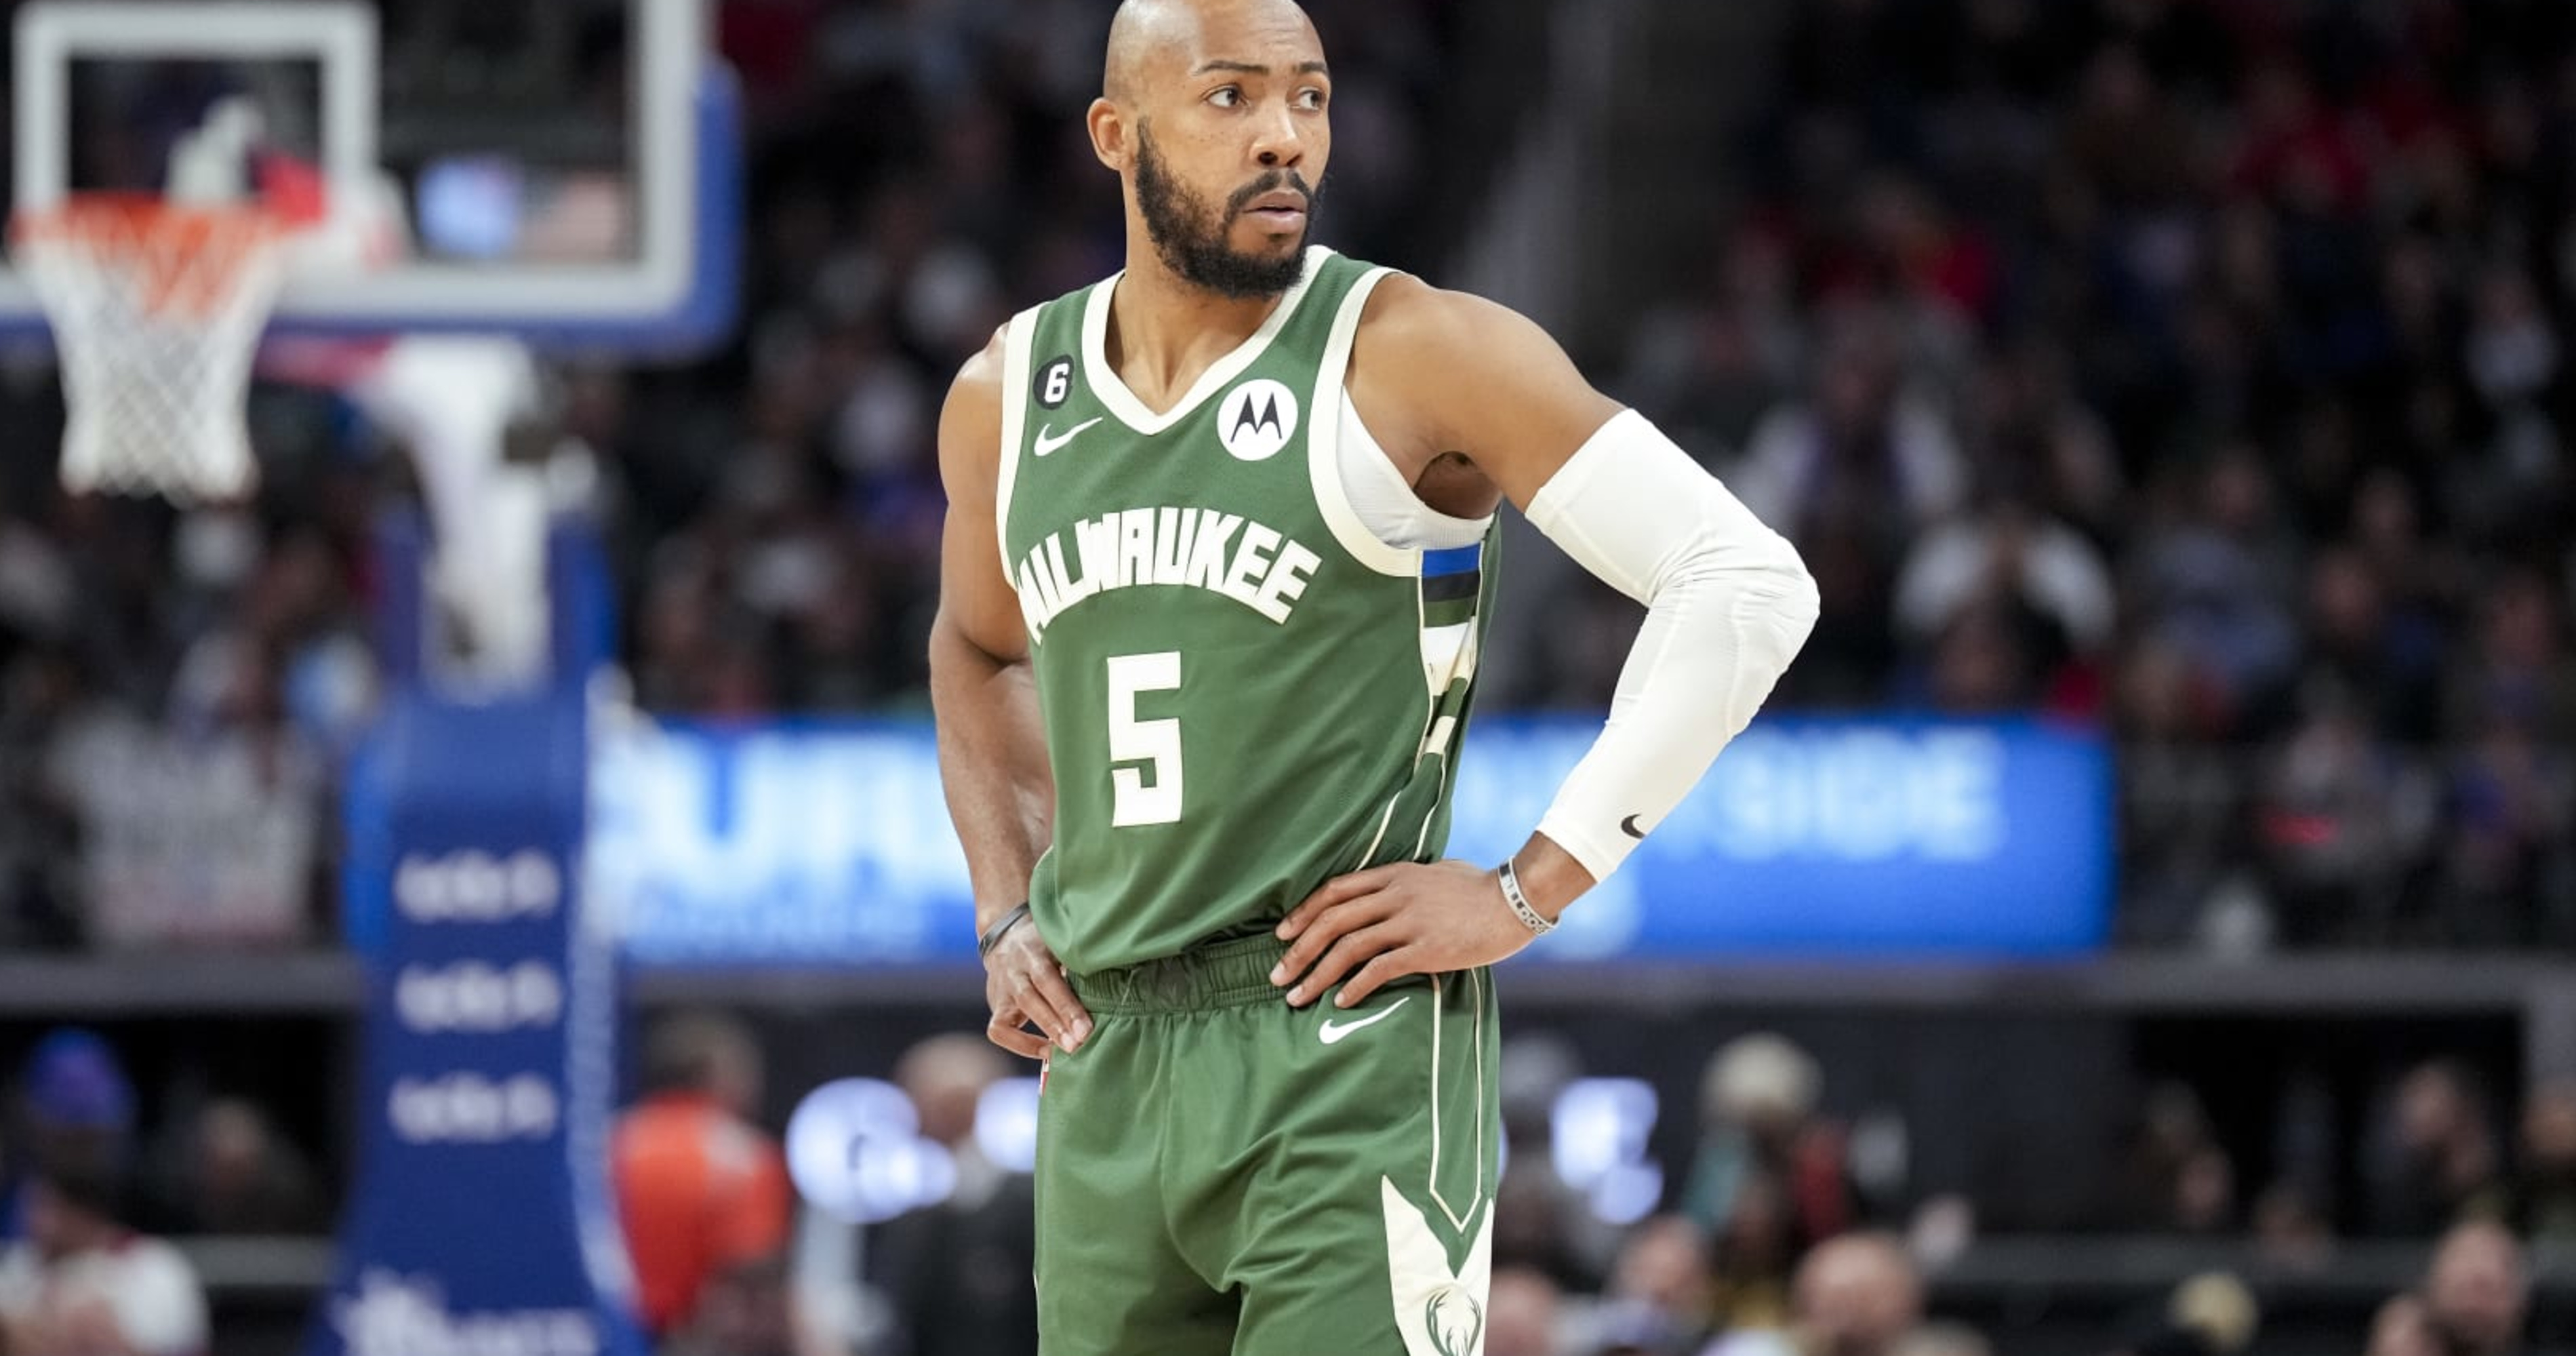 What will Jevon Carter bring to the Chicago Bulls?